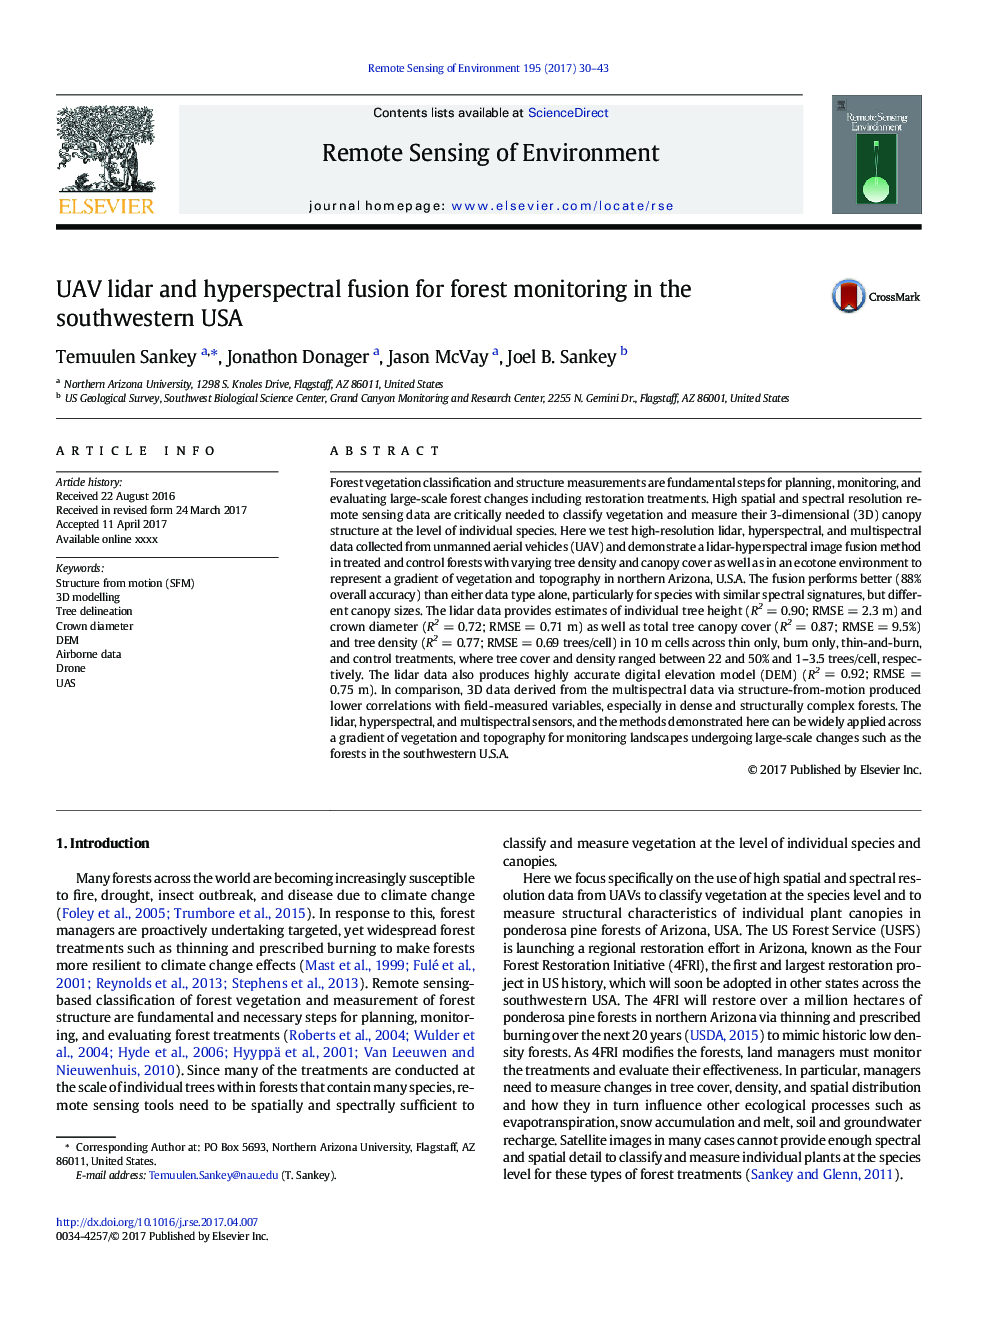 UAV lidar and hyperspectral fusion for forest monitoring in the southwestern USA